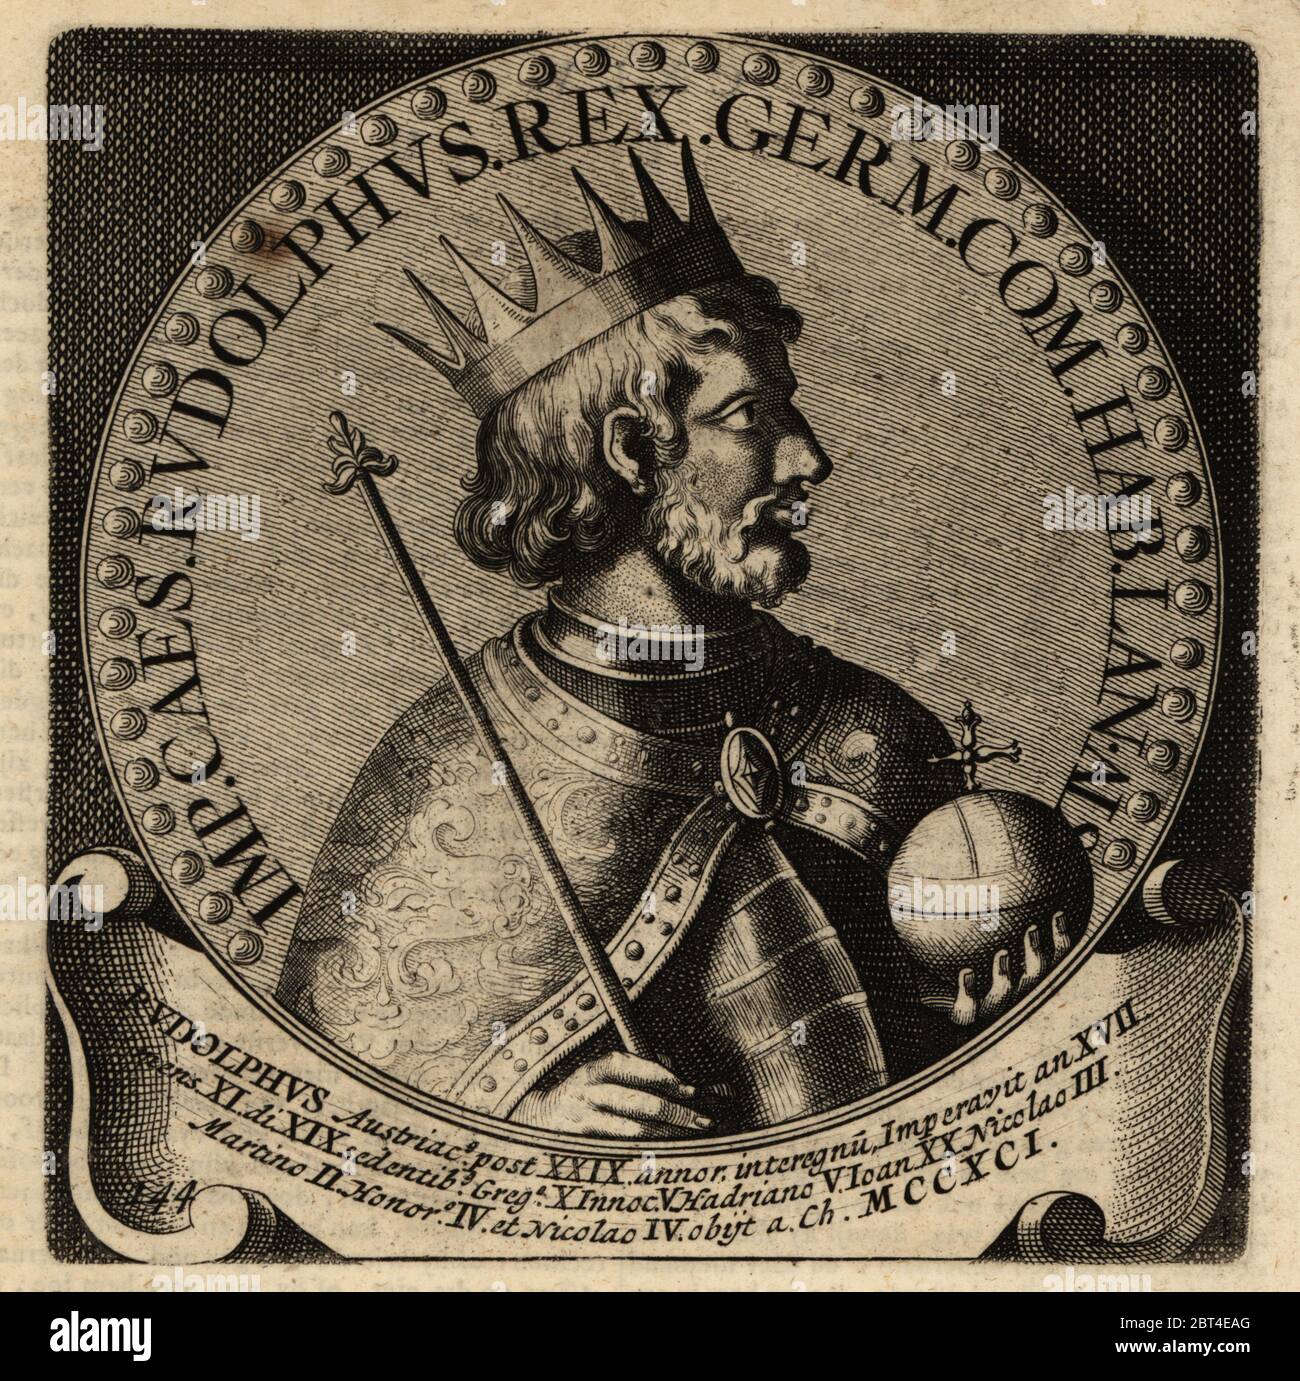 Rudolf I, King of Germany, Count of Habsburg, 1218-1291. Rudolf of Habsburg, Rudolphus Austriacus. Copperplate engraving from Abraham Bogaerts De Roomsche Monarchy, The Roman Monarchy, Francois Salma, Utrecht, 1697. Stock Photo